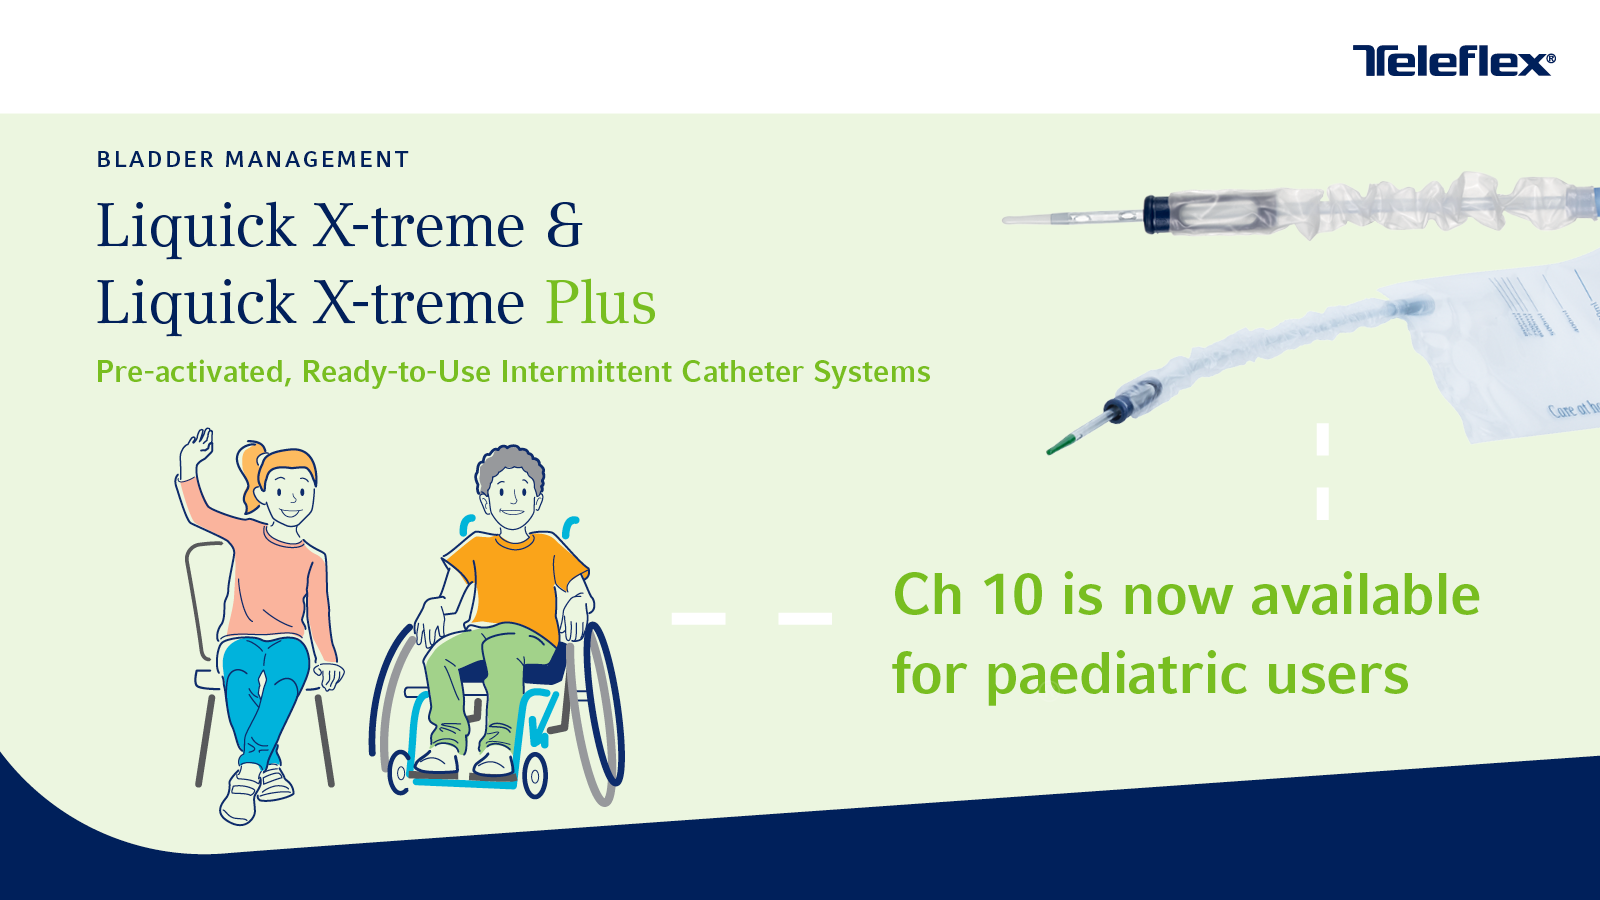 Ch 10 is now available for paediatric users